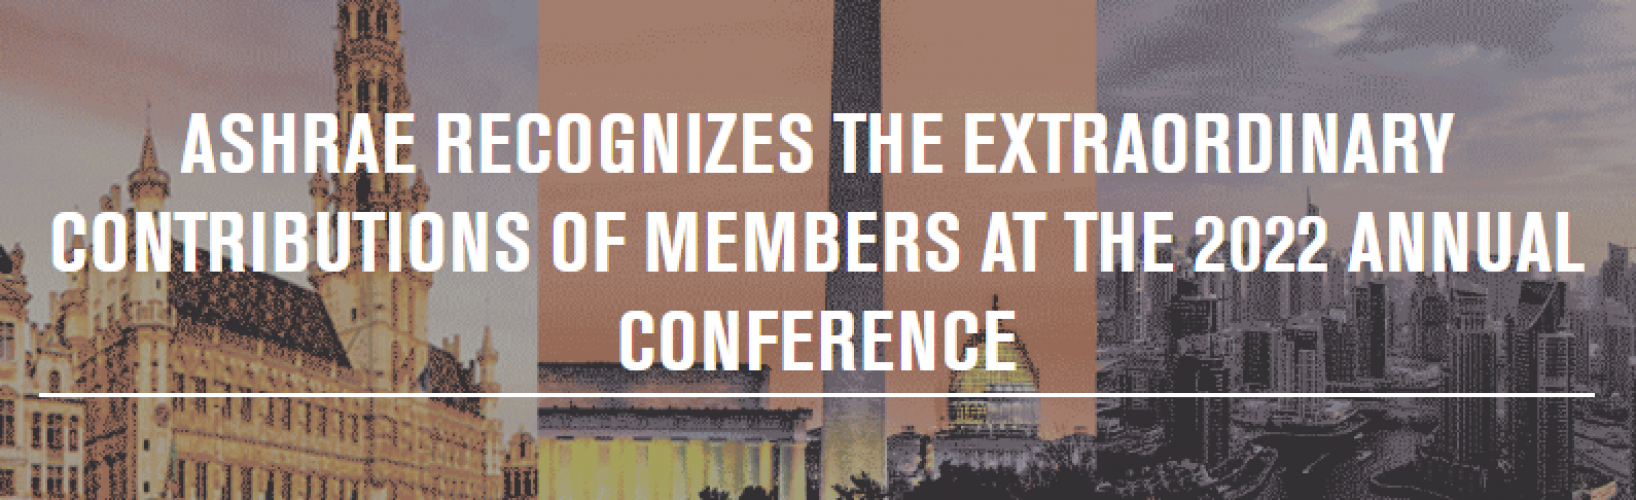 ASHRAE Recognizes the Extraordinary Contributions of Members at the 2022 Annual Conference